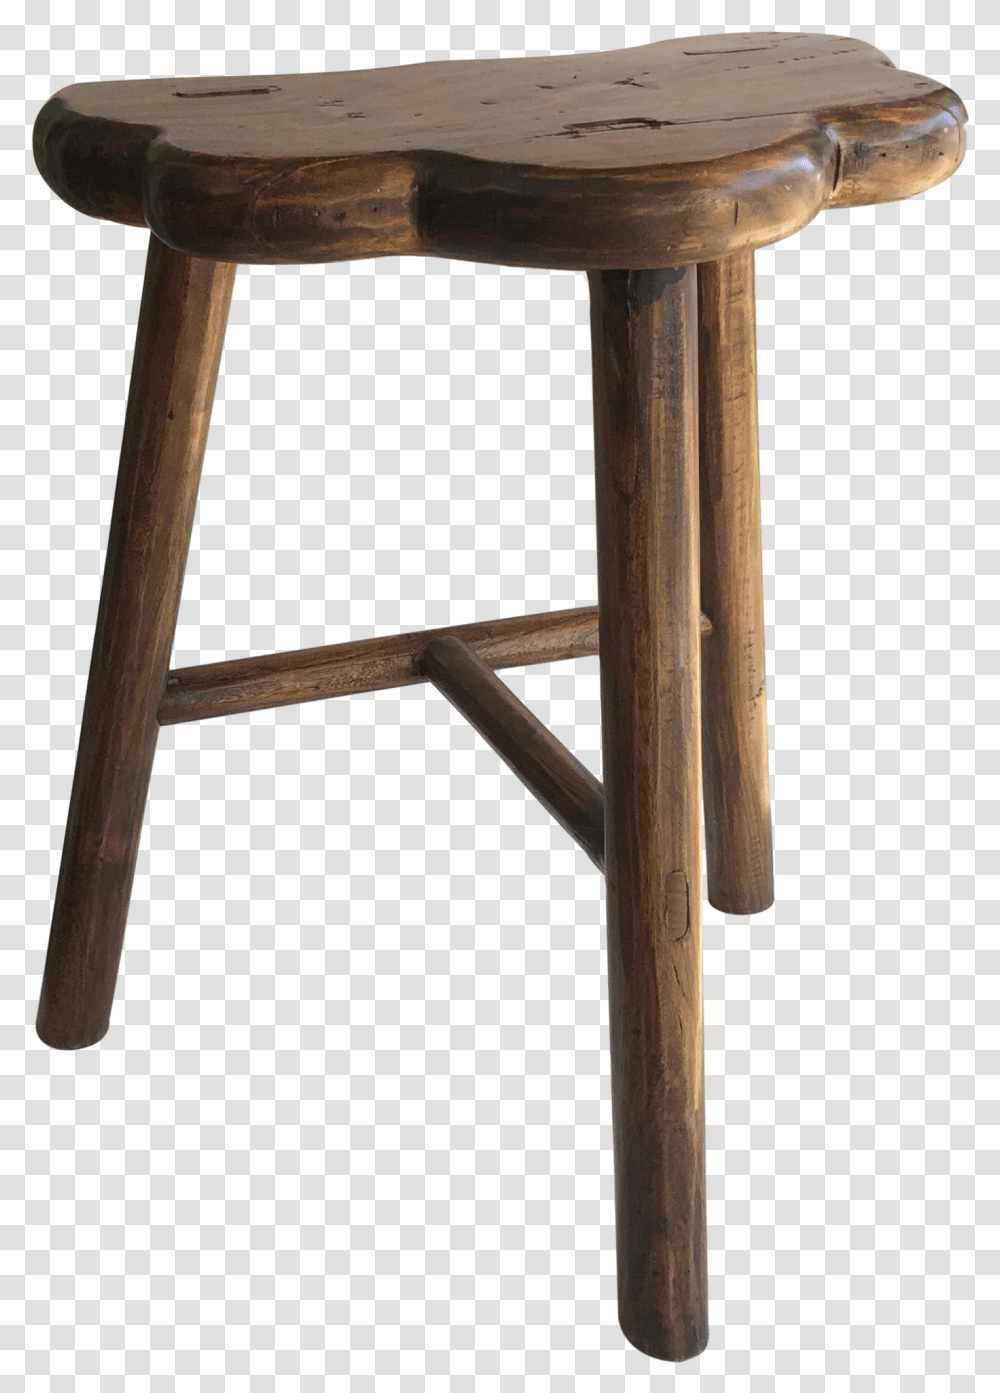 Small Rustic Wooden Stool Bar Stool, Furniture, Hammer, Chair, Table Transparent Png